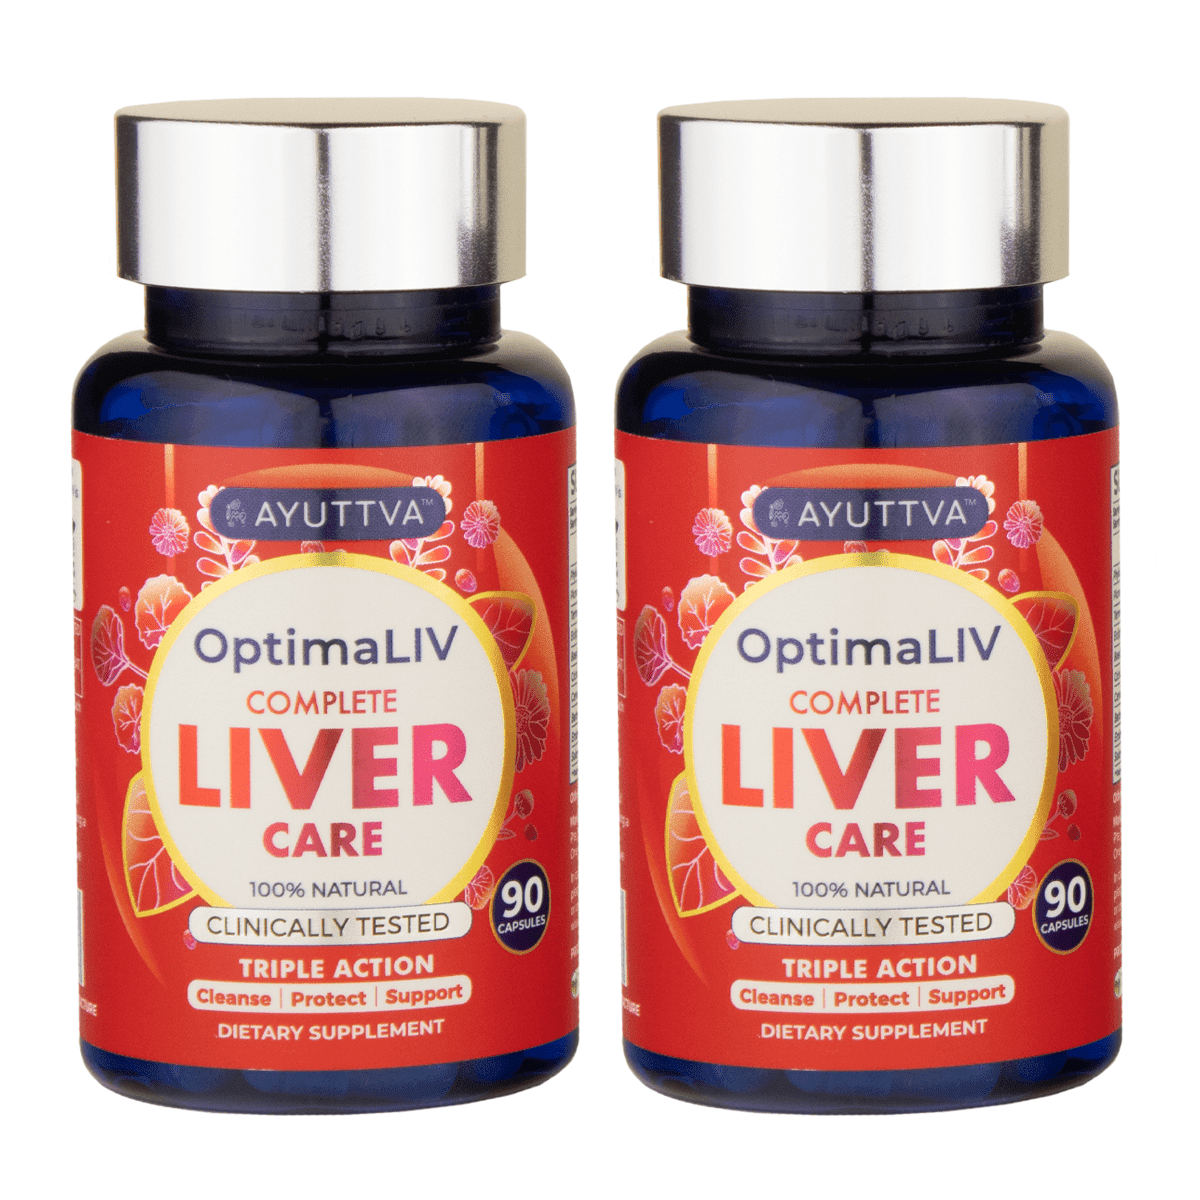 OptimaLIV: Clinically Tested, Triple-Action Ayurvedic Liver Function Supplement | Pack of 2 Supplements Ayuttva 